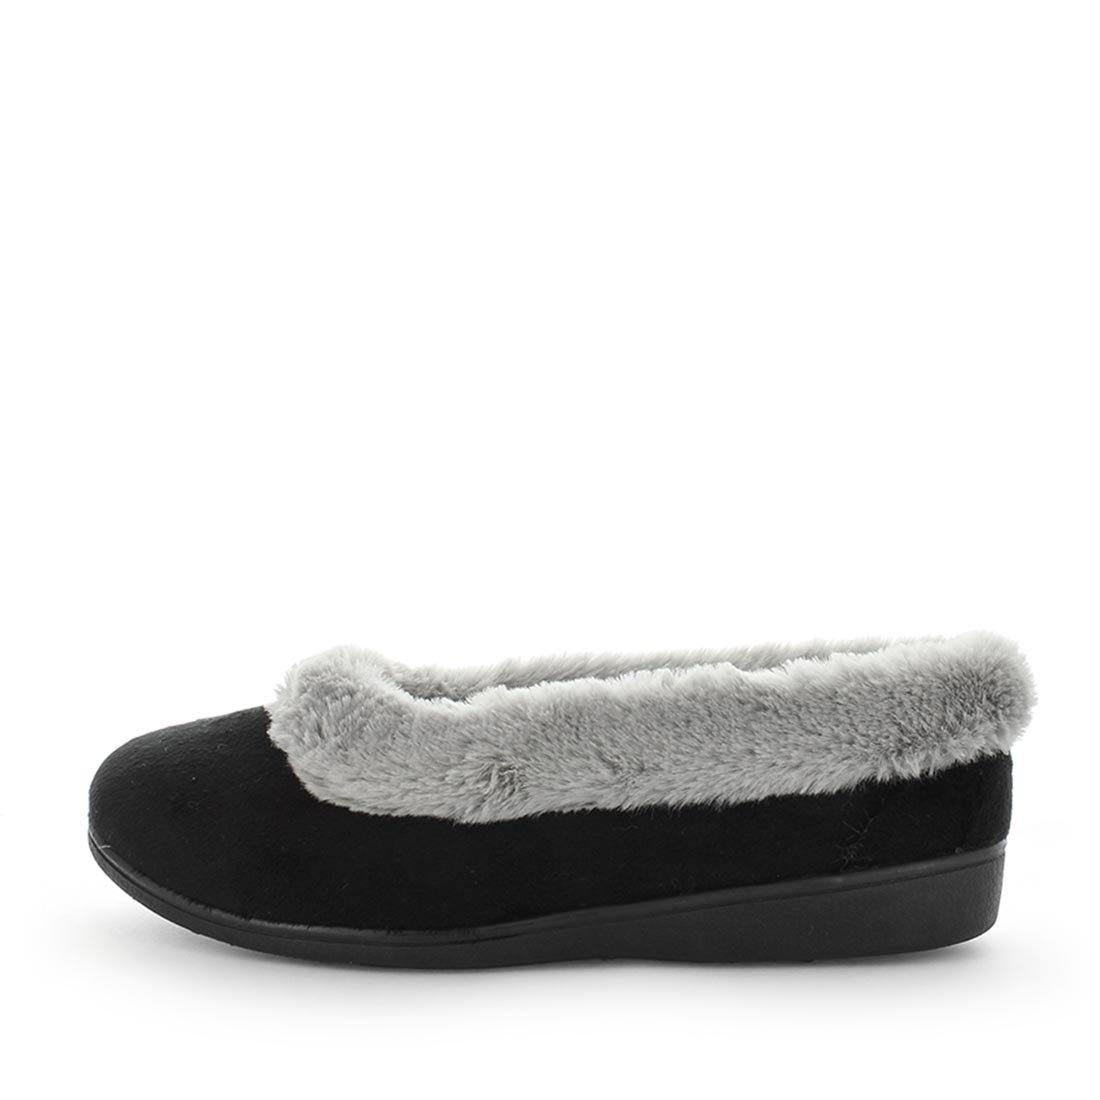 Elmo by panda slippers - womens slippers - memory foam slippers - womens ballet slippers - all year slippers - cute felt ballet slipper by panda slippers with microterry lining, faux fur collar trim and a memory foam sock for extra comfort